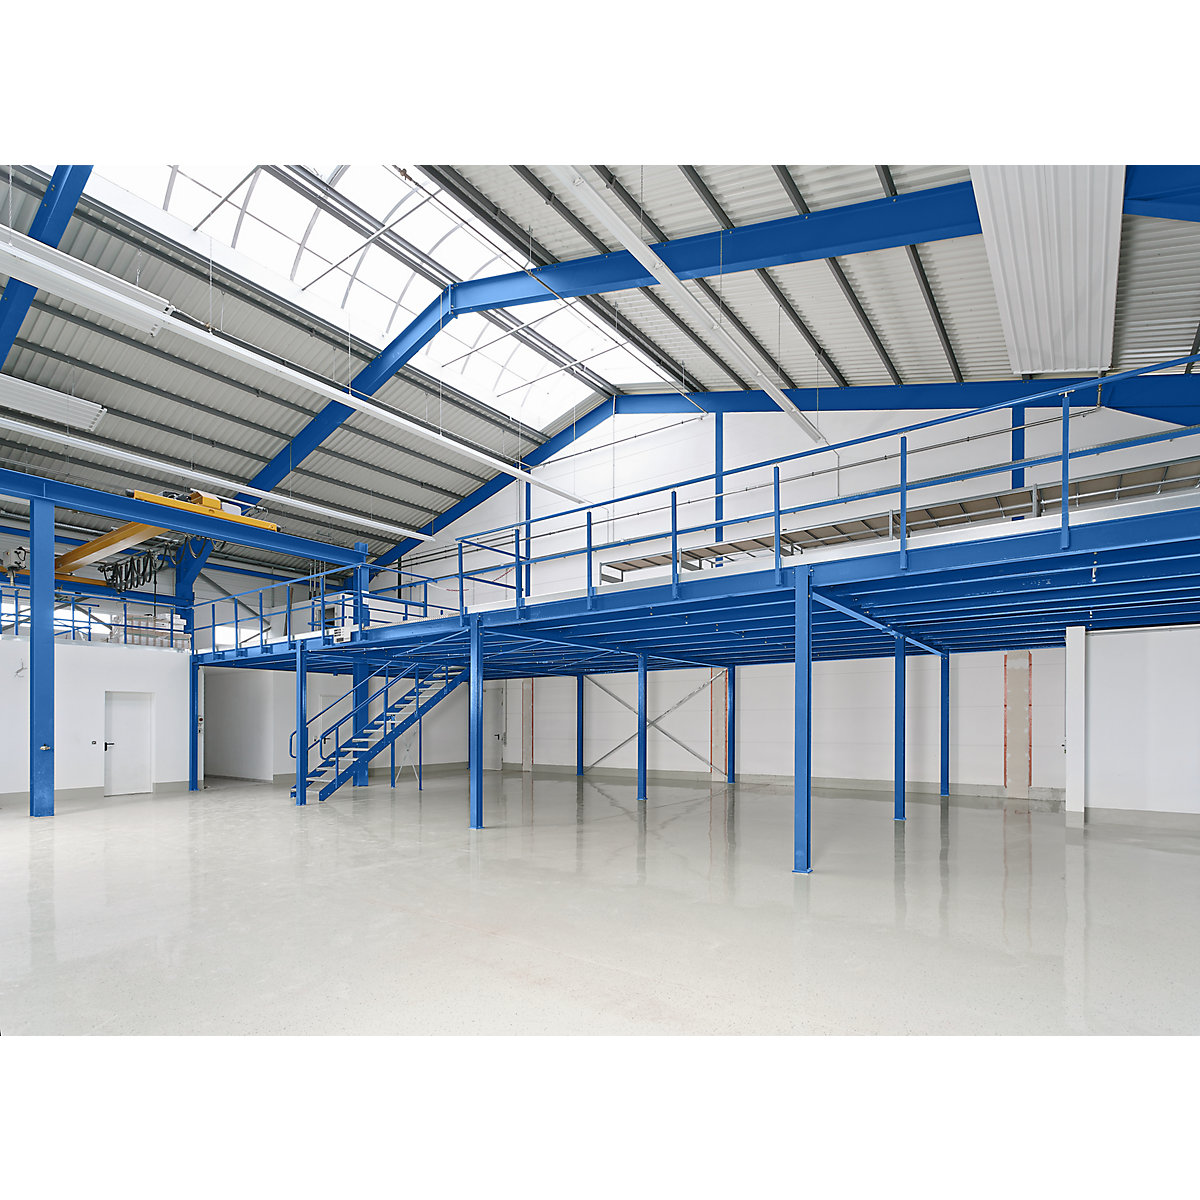 Mezzanine, rayonnage additionnel, charge max. 500 kg/m², entr'axe montants 5000 x 5000 mm